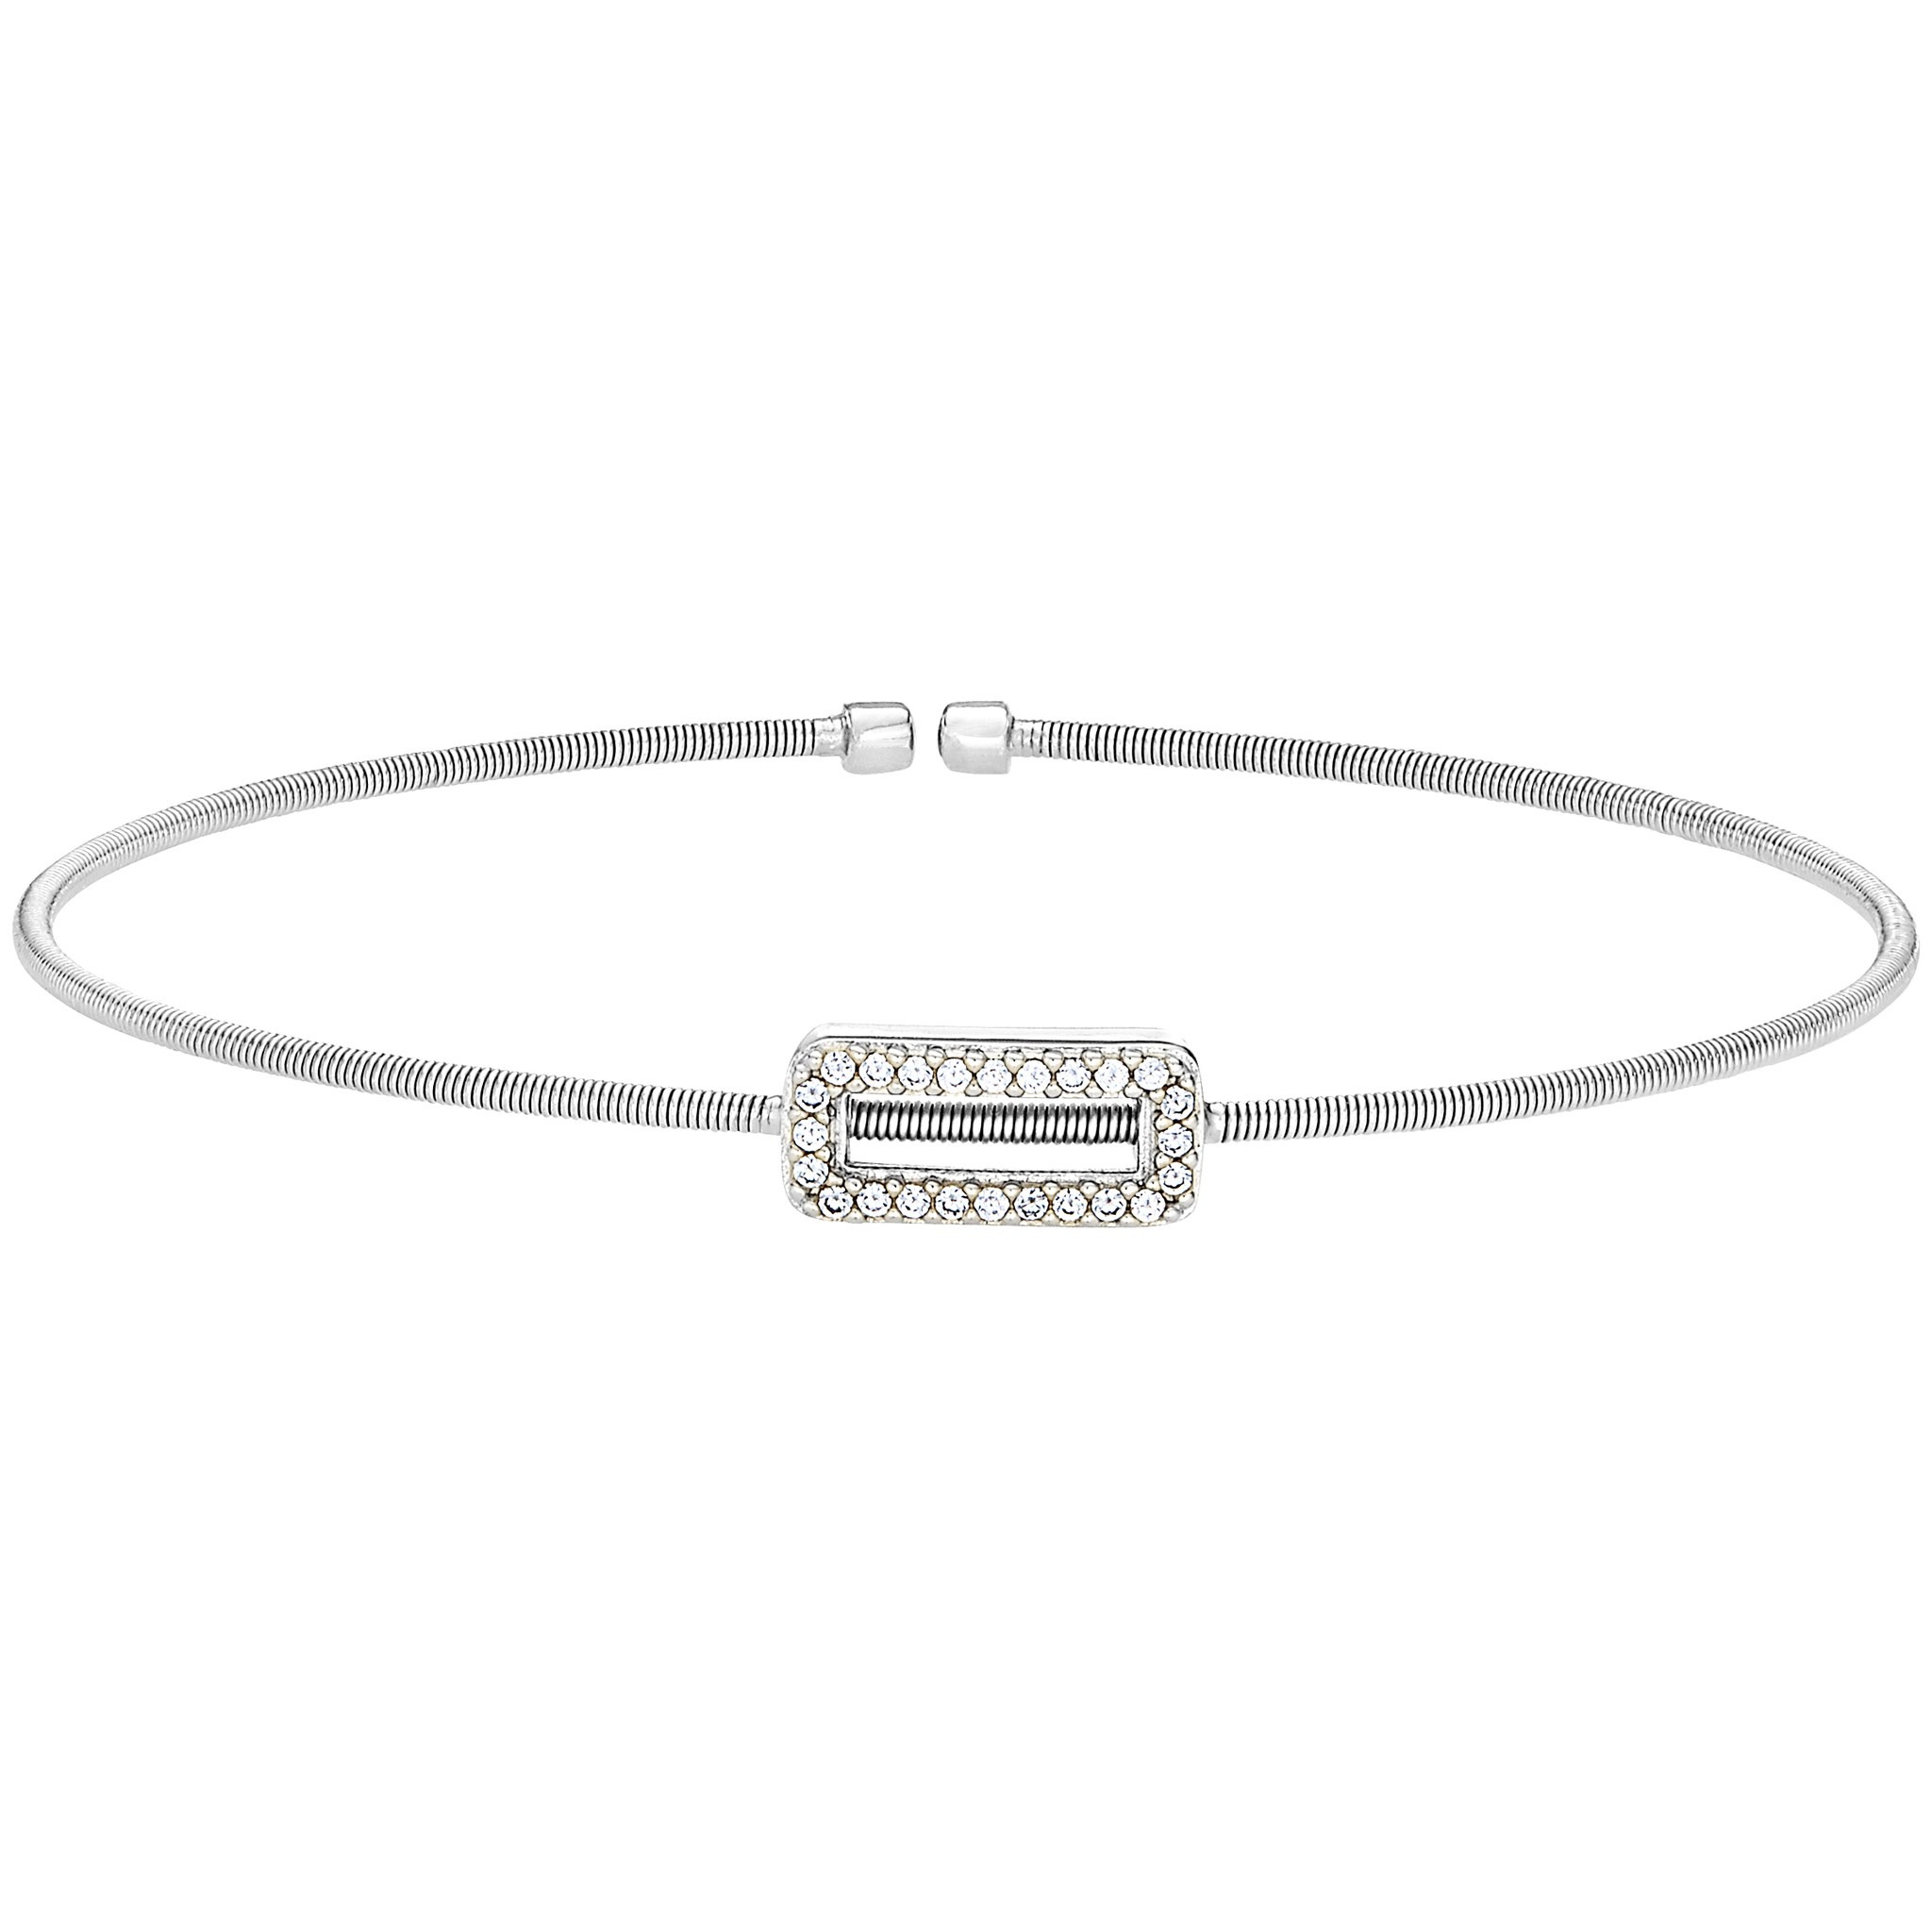 Rhodium Finish Sterling Silver Cable Cuff Bracelet with Open Rectangle